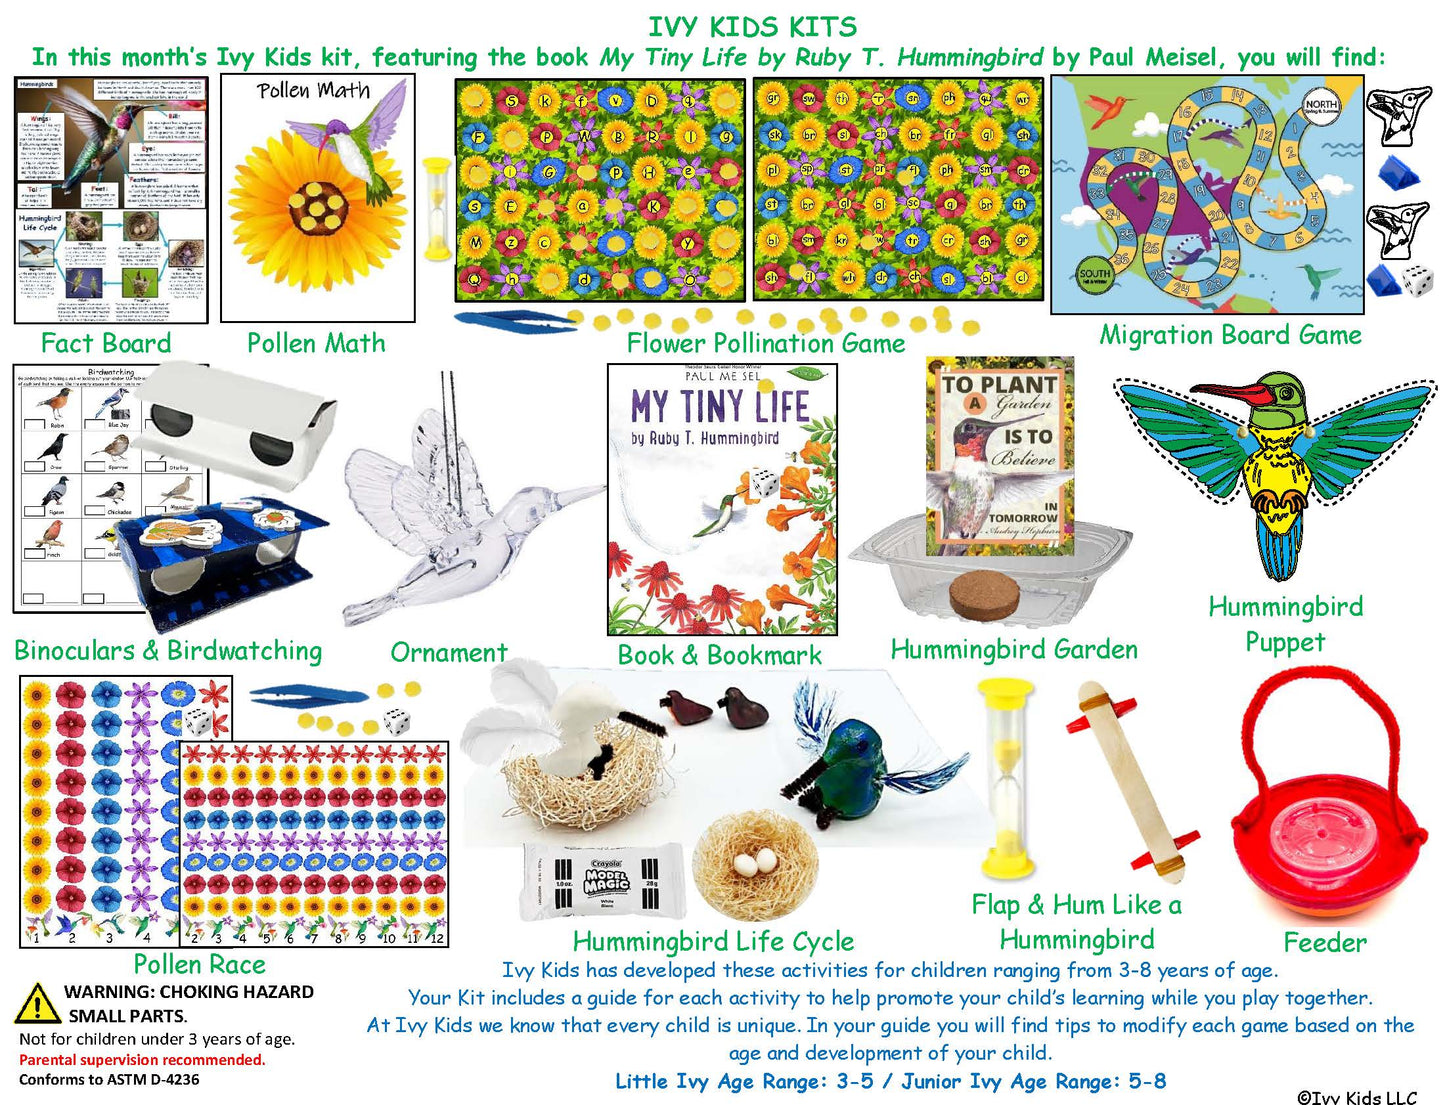 Hummingbird activities inspired by the book My Tiny Life